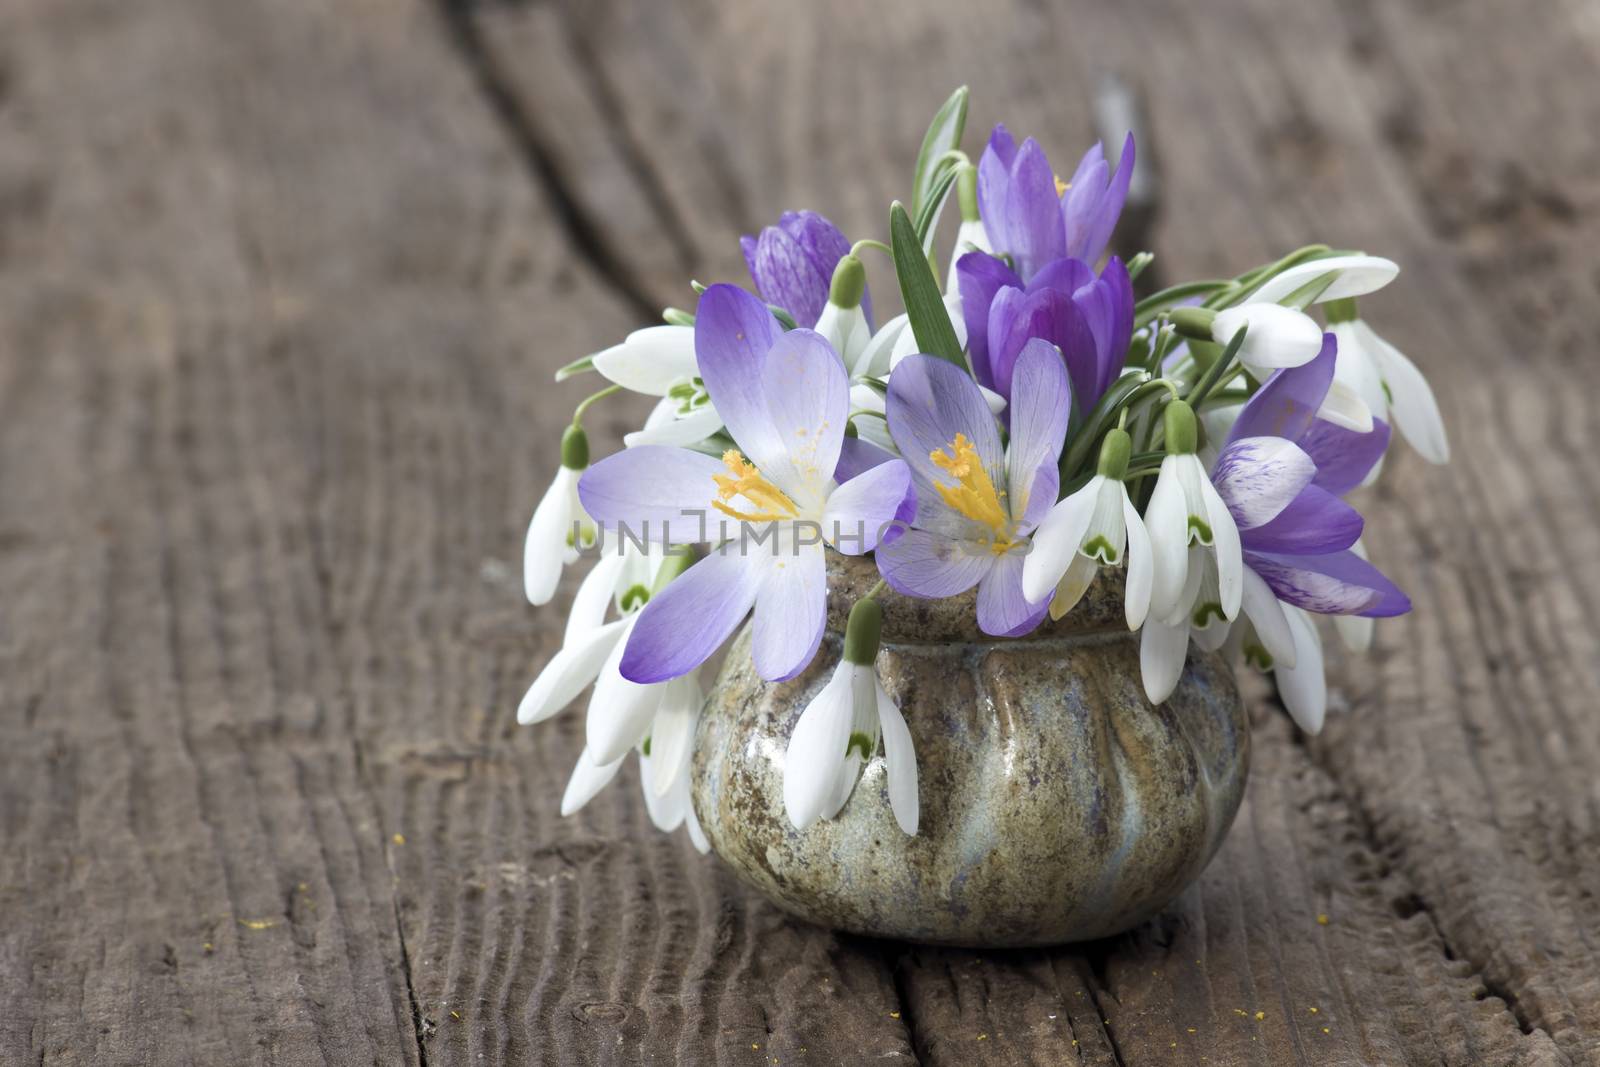 Bunch of crocus and snowdrops in a vase on the wooden table. by miradrozdowski